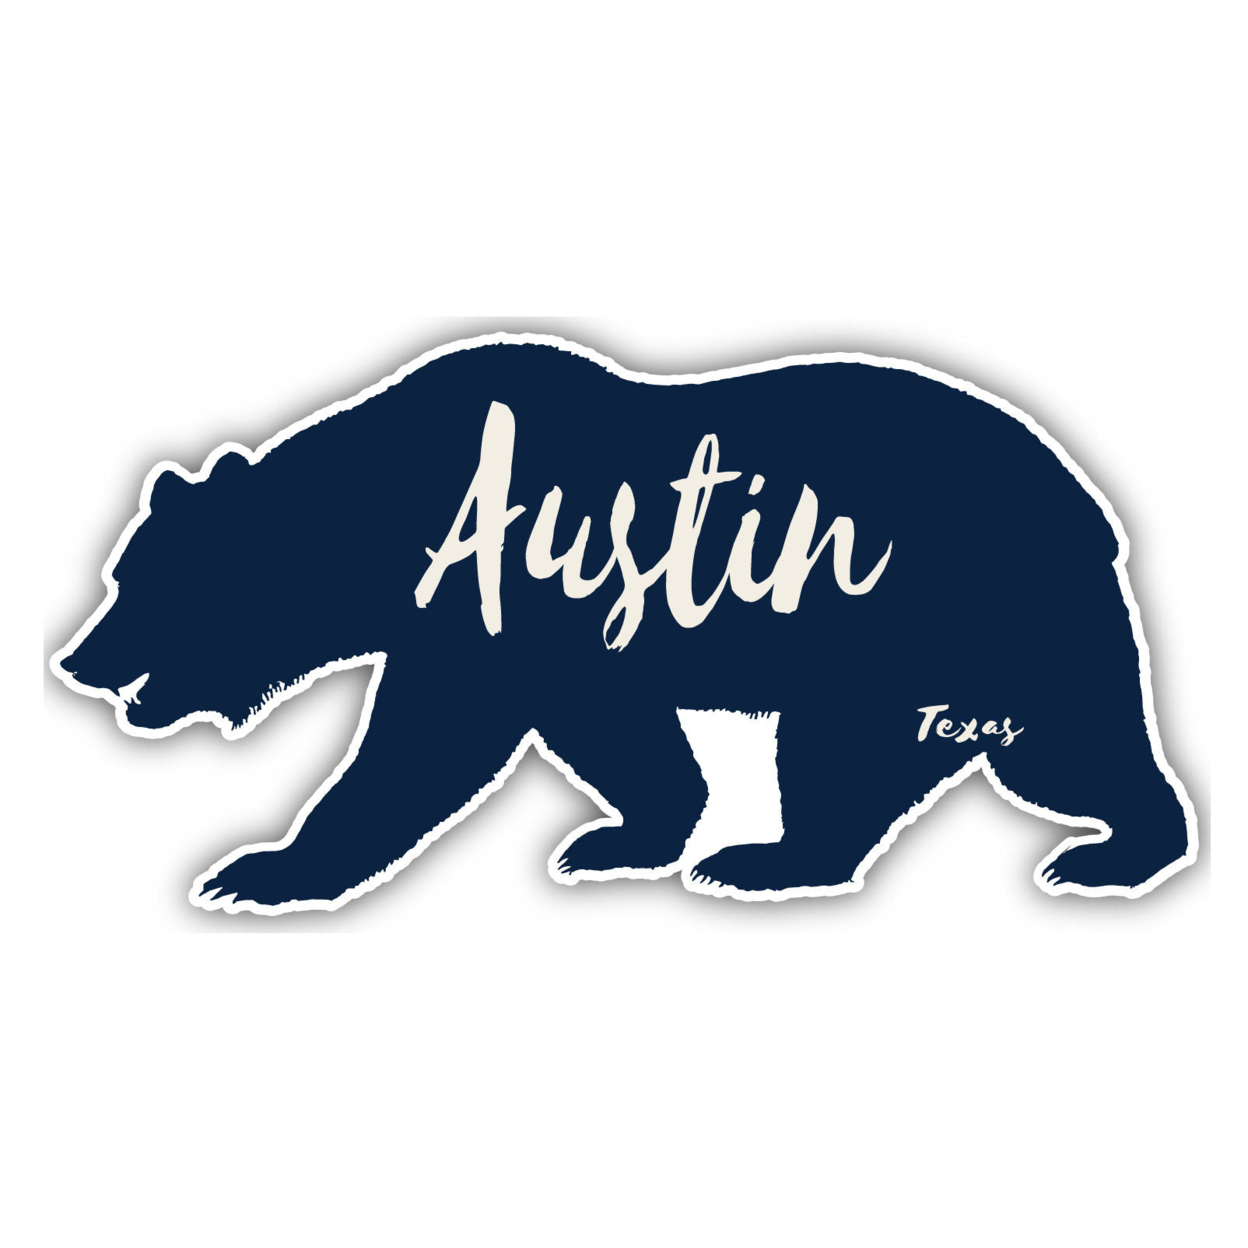 Austin Texas Souvenir Decorative Stickers (Choose Theme And Size) - 4-Pack, 4-Inch, Great Outdoors